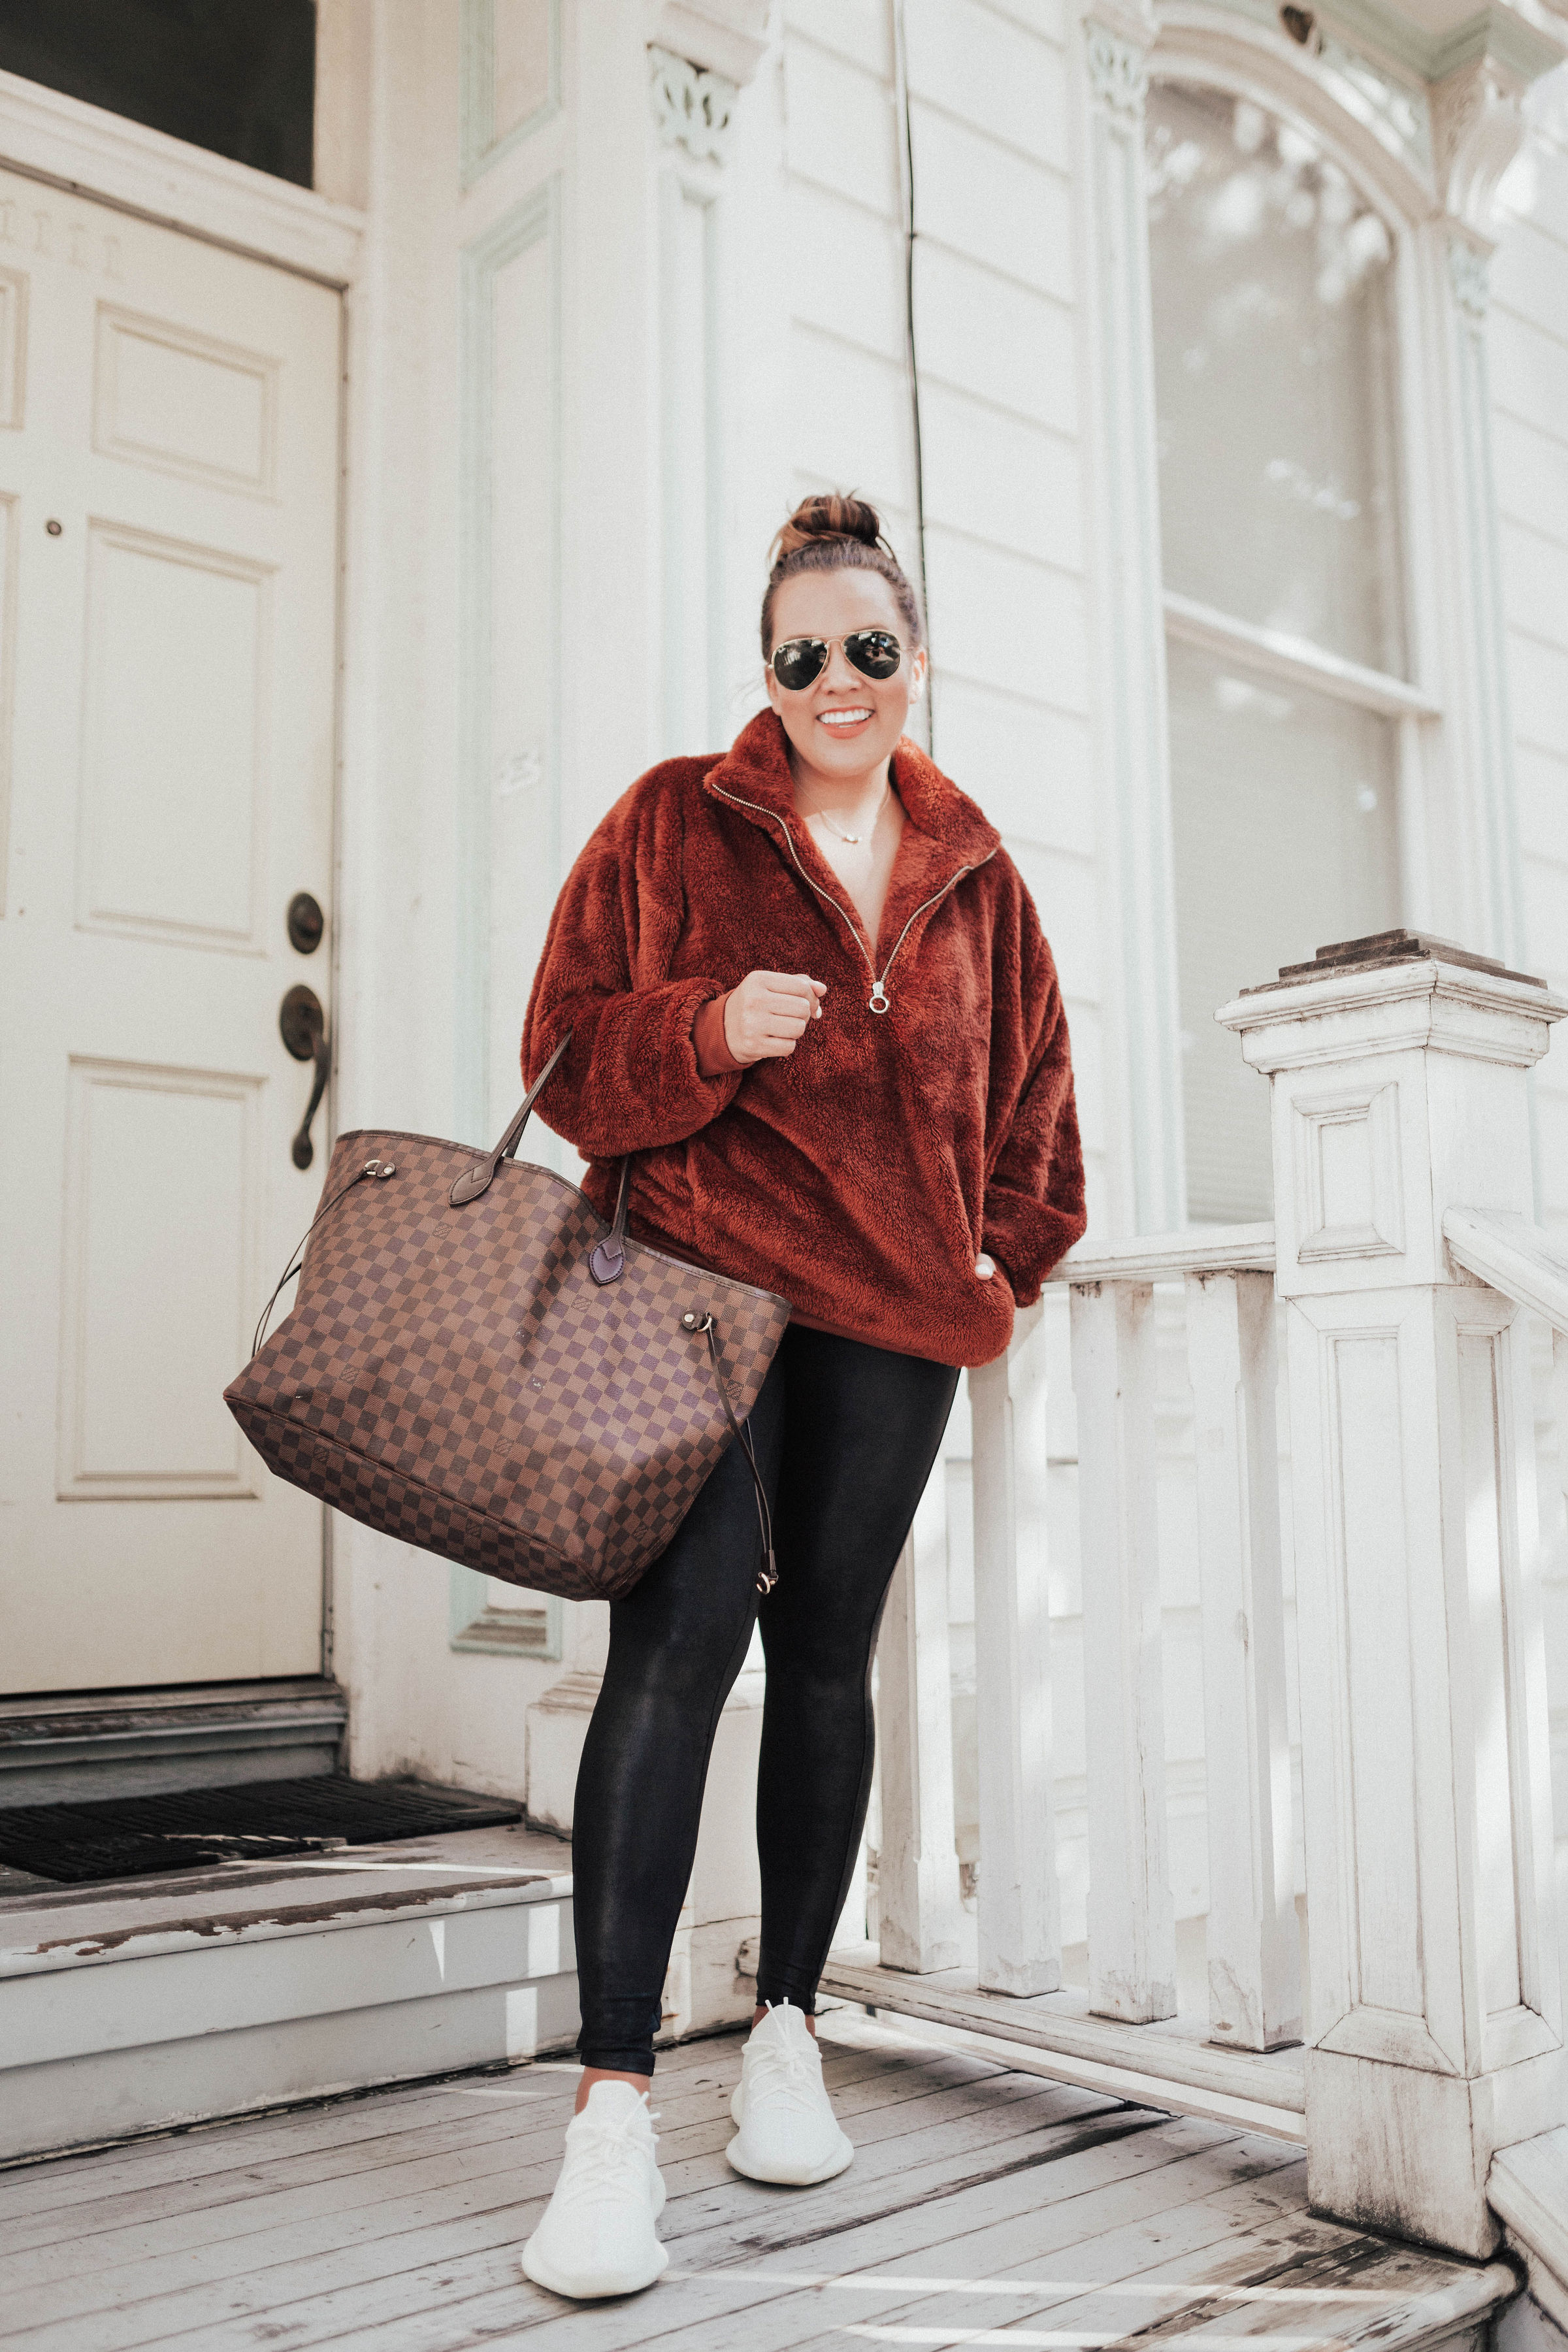 San Francisco blogger, Ashley Zeal, from Two Peas in a Prada shares 10 ways to style Spanx Leggings. They are currently on sale for 20% off!